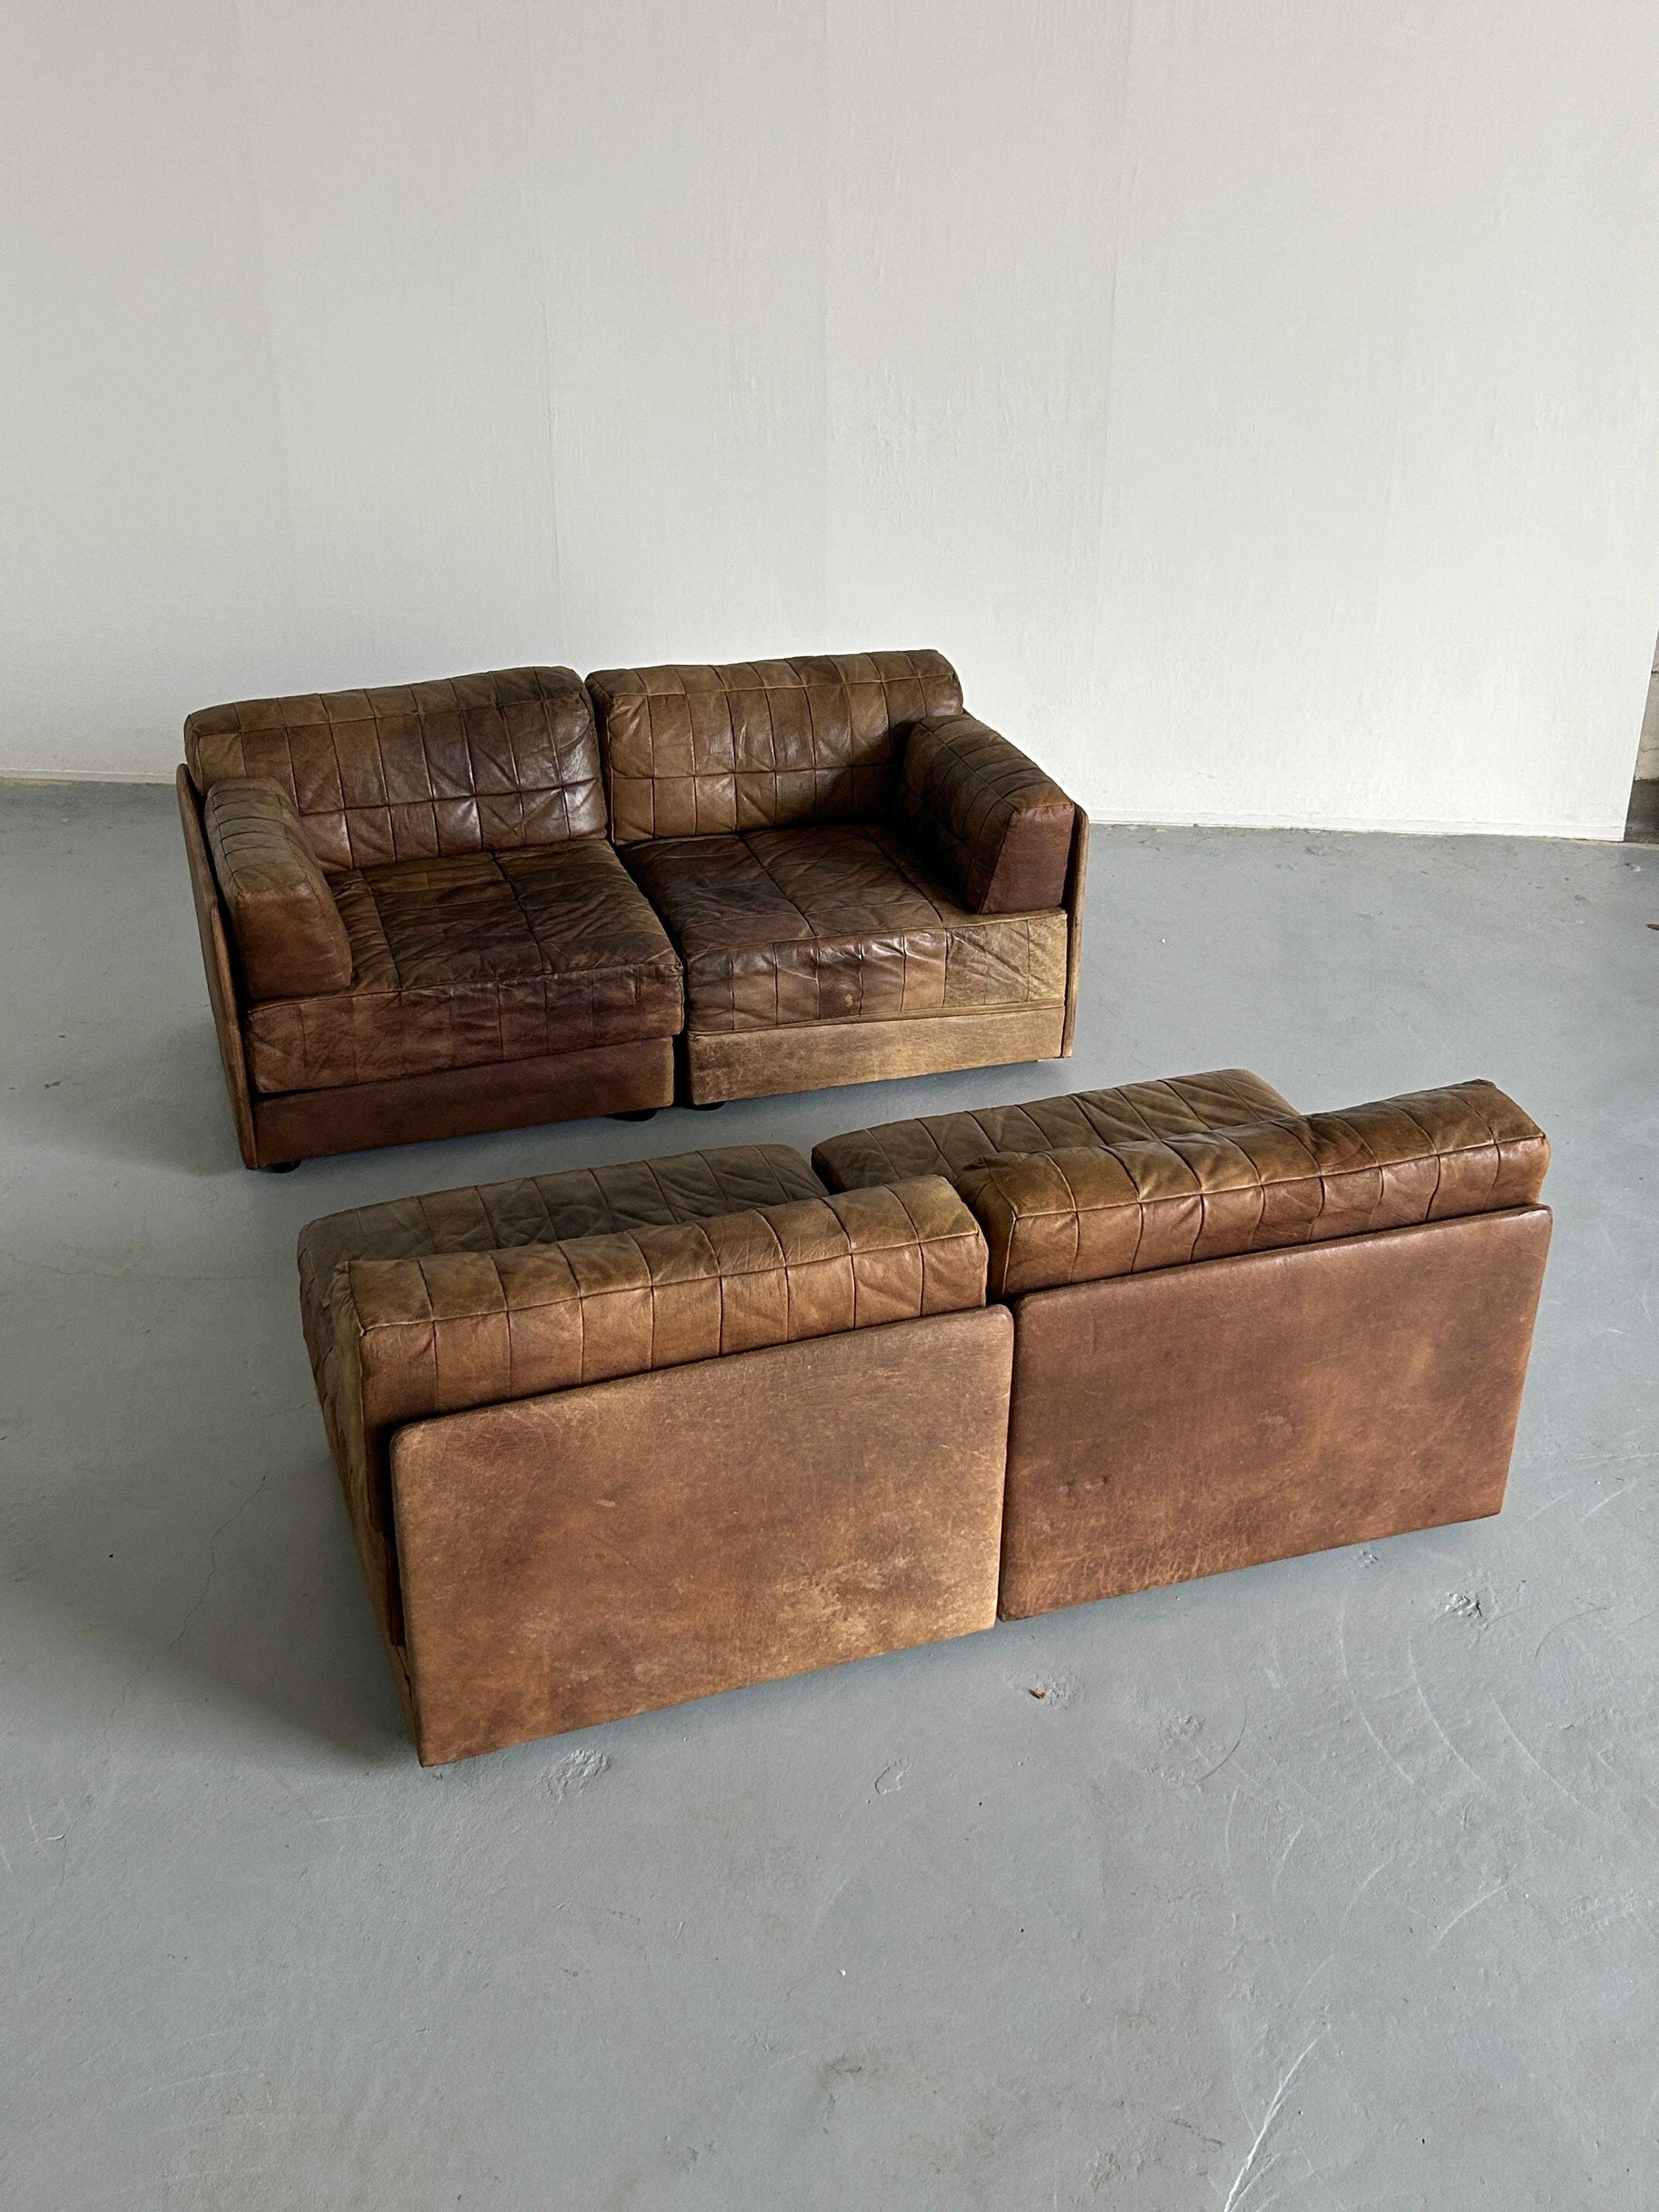 Late 20th Century Mid-Century-Modern Leather Modular Sofa in the style of De Sede Patchwork, 1970s